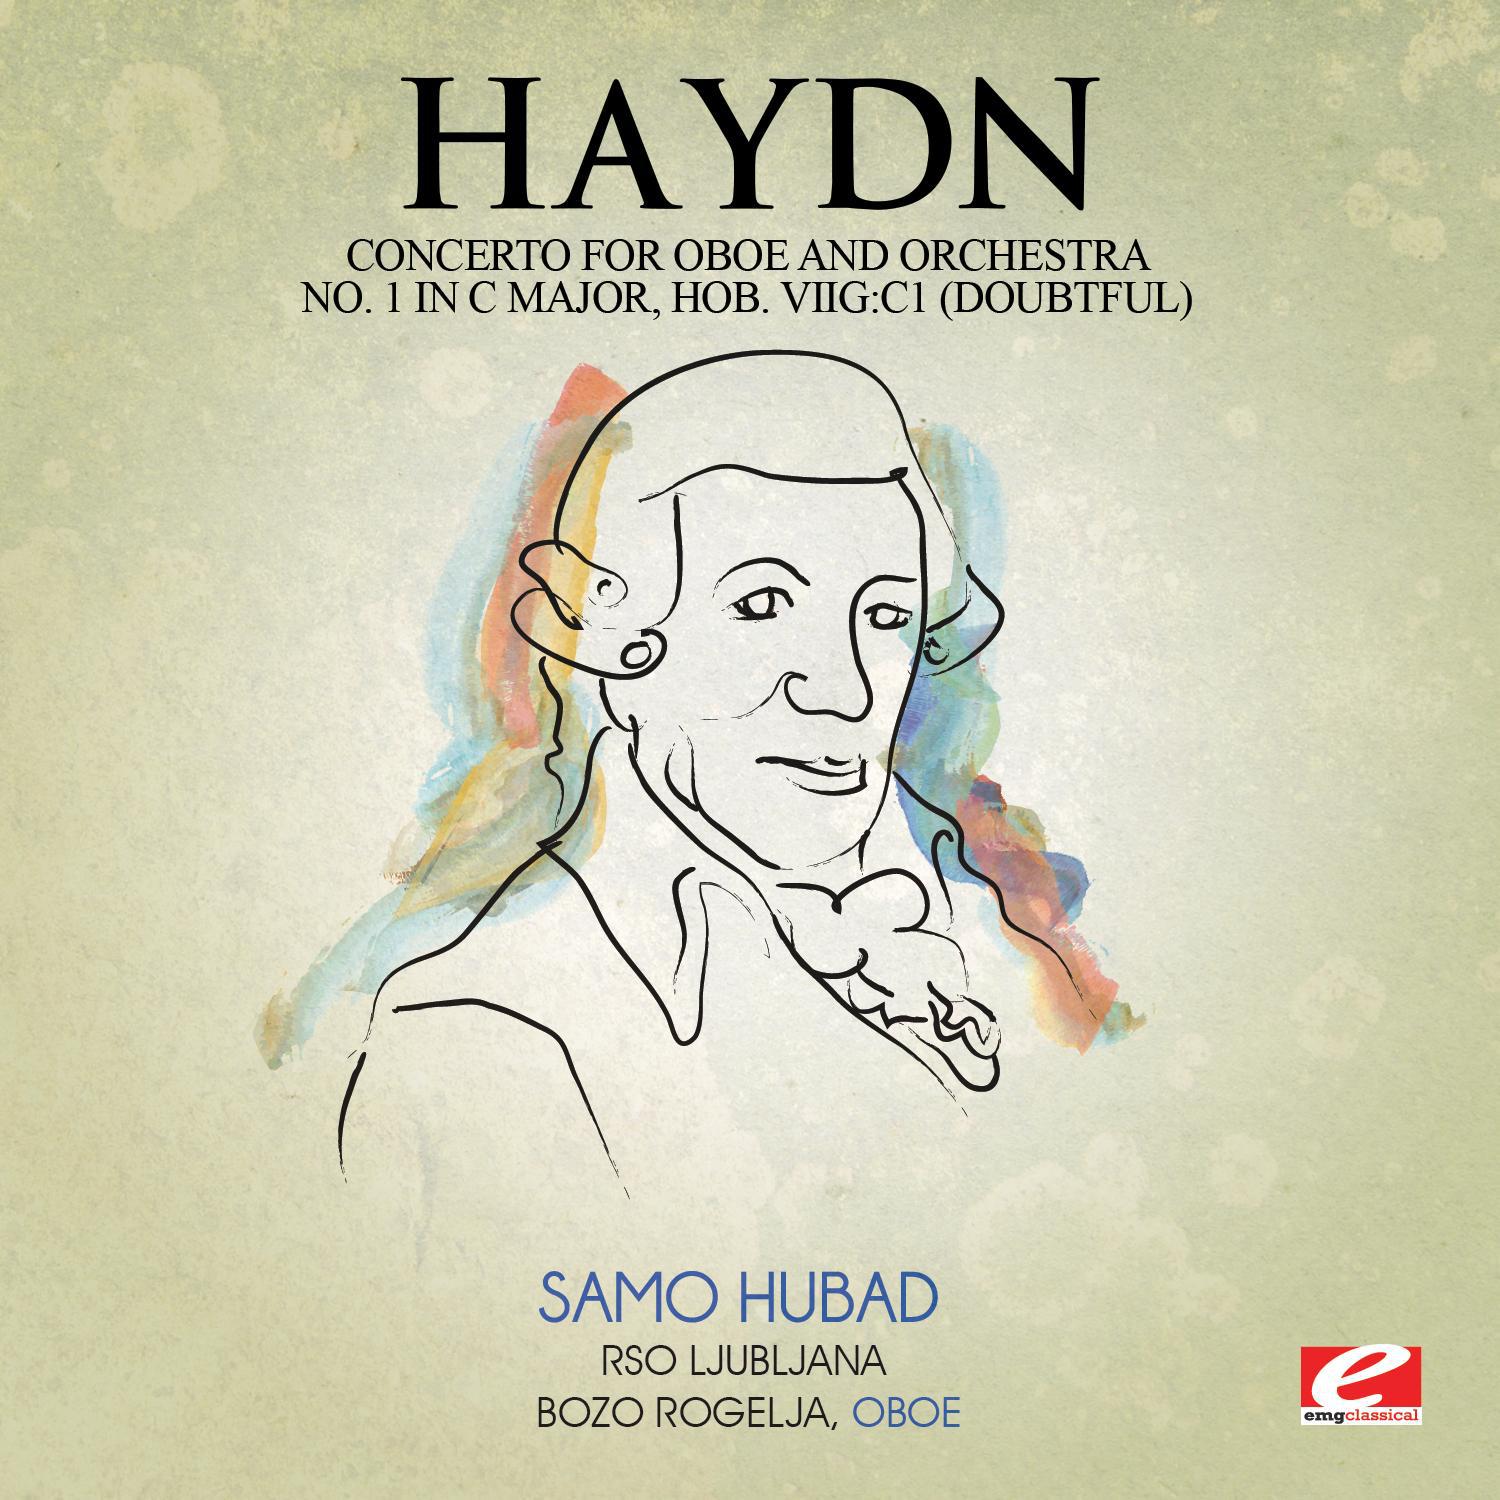 Haydn: Concerto for Oboe and Orchestra No. 1 in C Major, Hob. VIIg:C1 (doubtful) [Digitally Remastered]